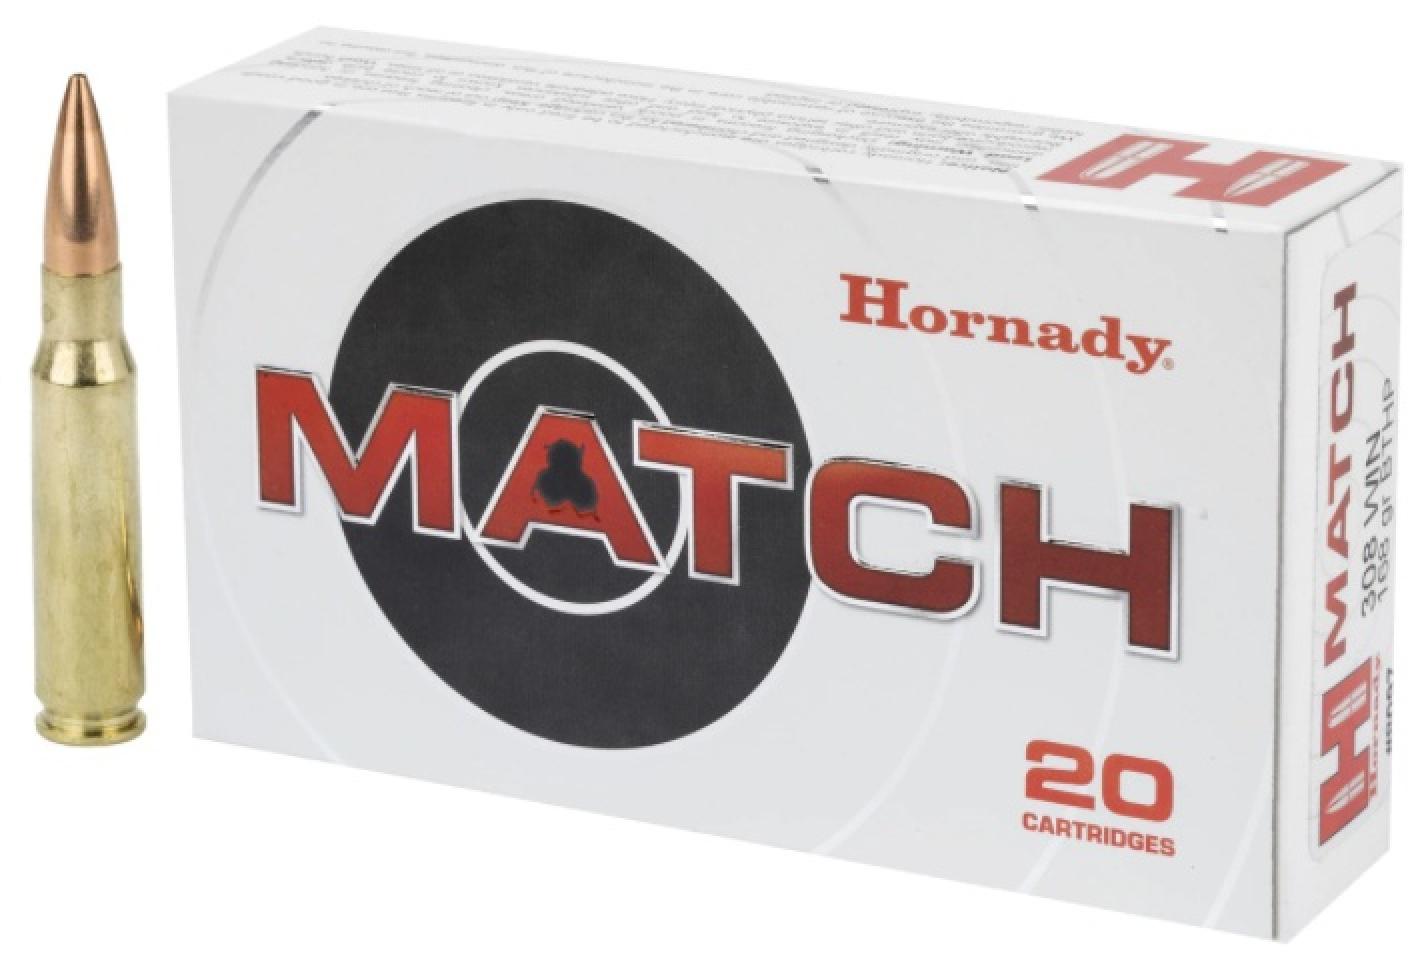 Hornady Match™ 308 Winchester 168 grain Hollow Point Boat Tail